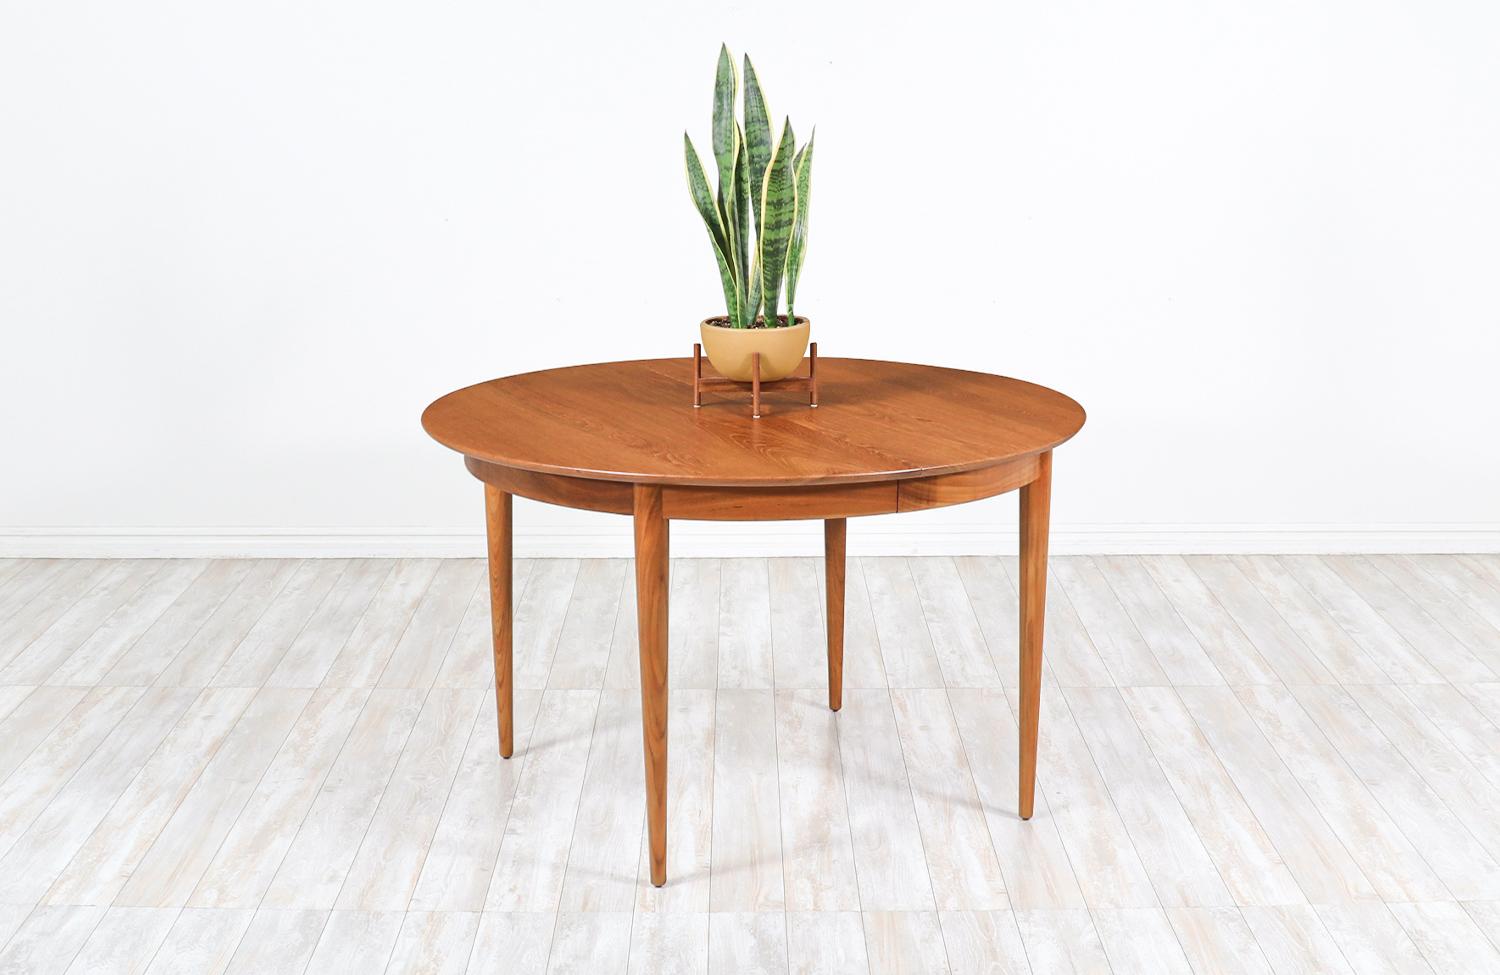 Mid-Century Modern round teak expanding dining table

Dimensions
29in H x 47in - 87 W x 47in D 
2x Extension Leaf 20in.